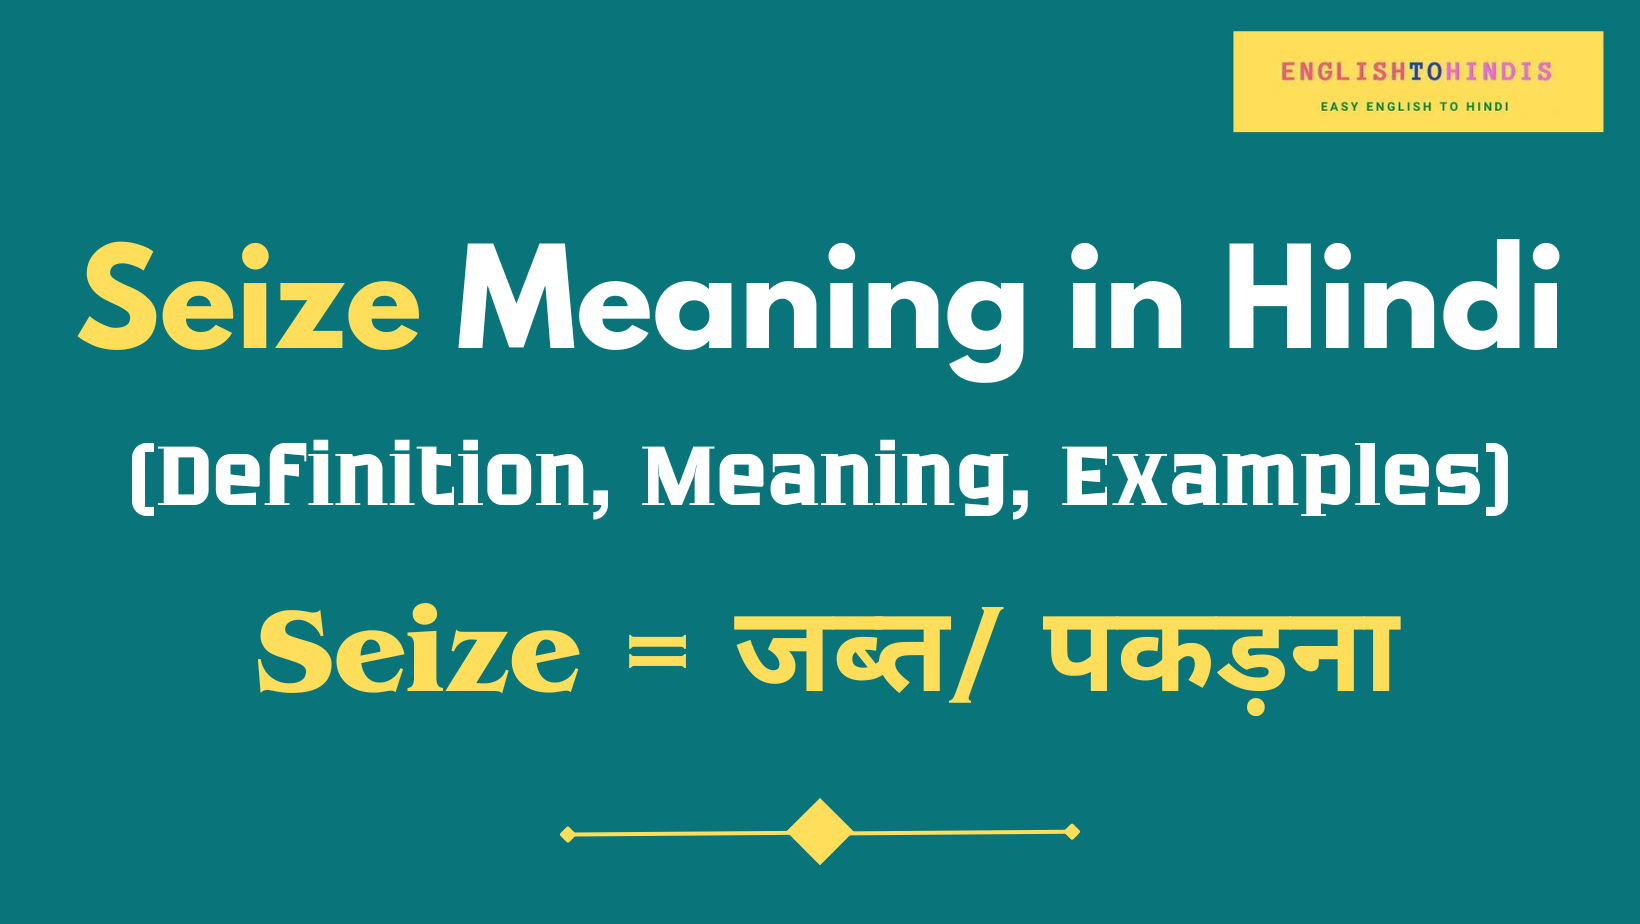 Seize Meaning in Hindi